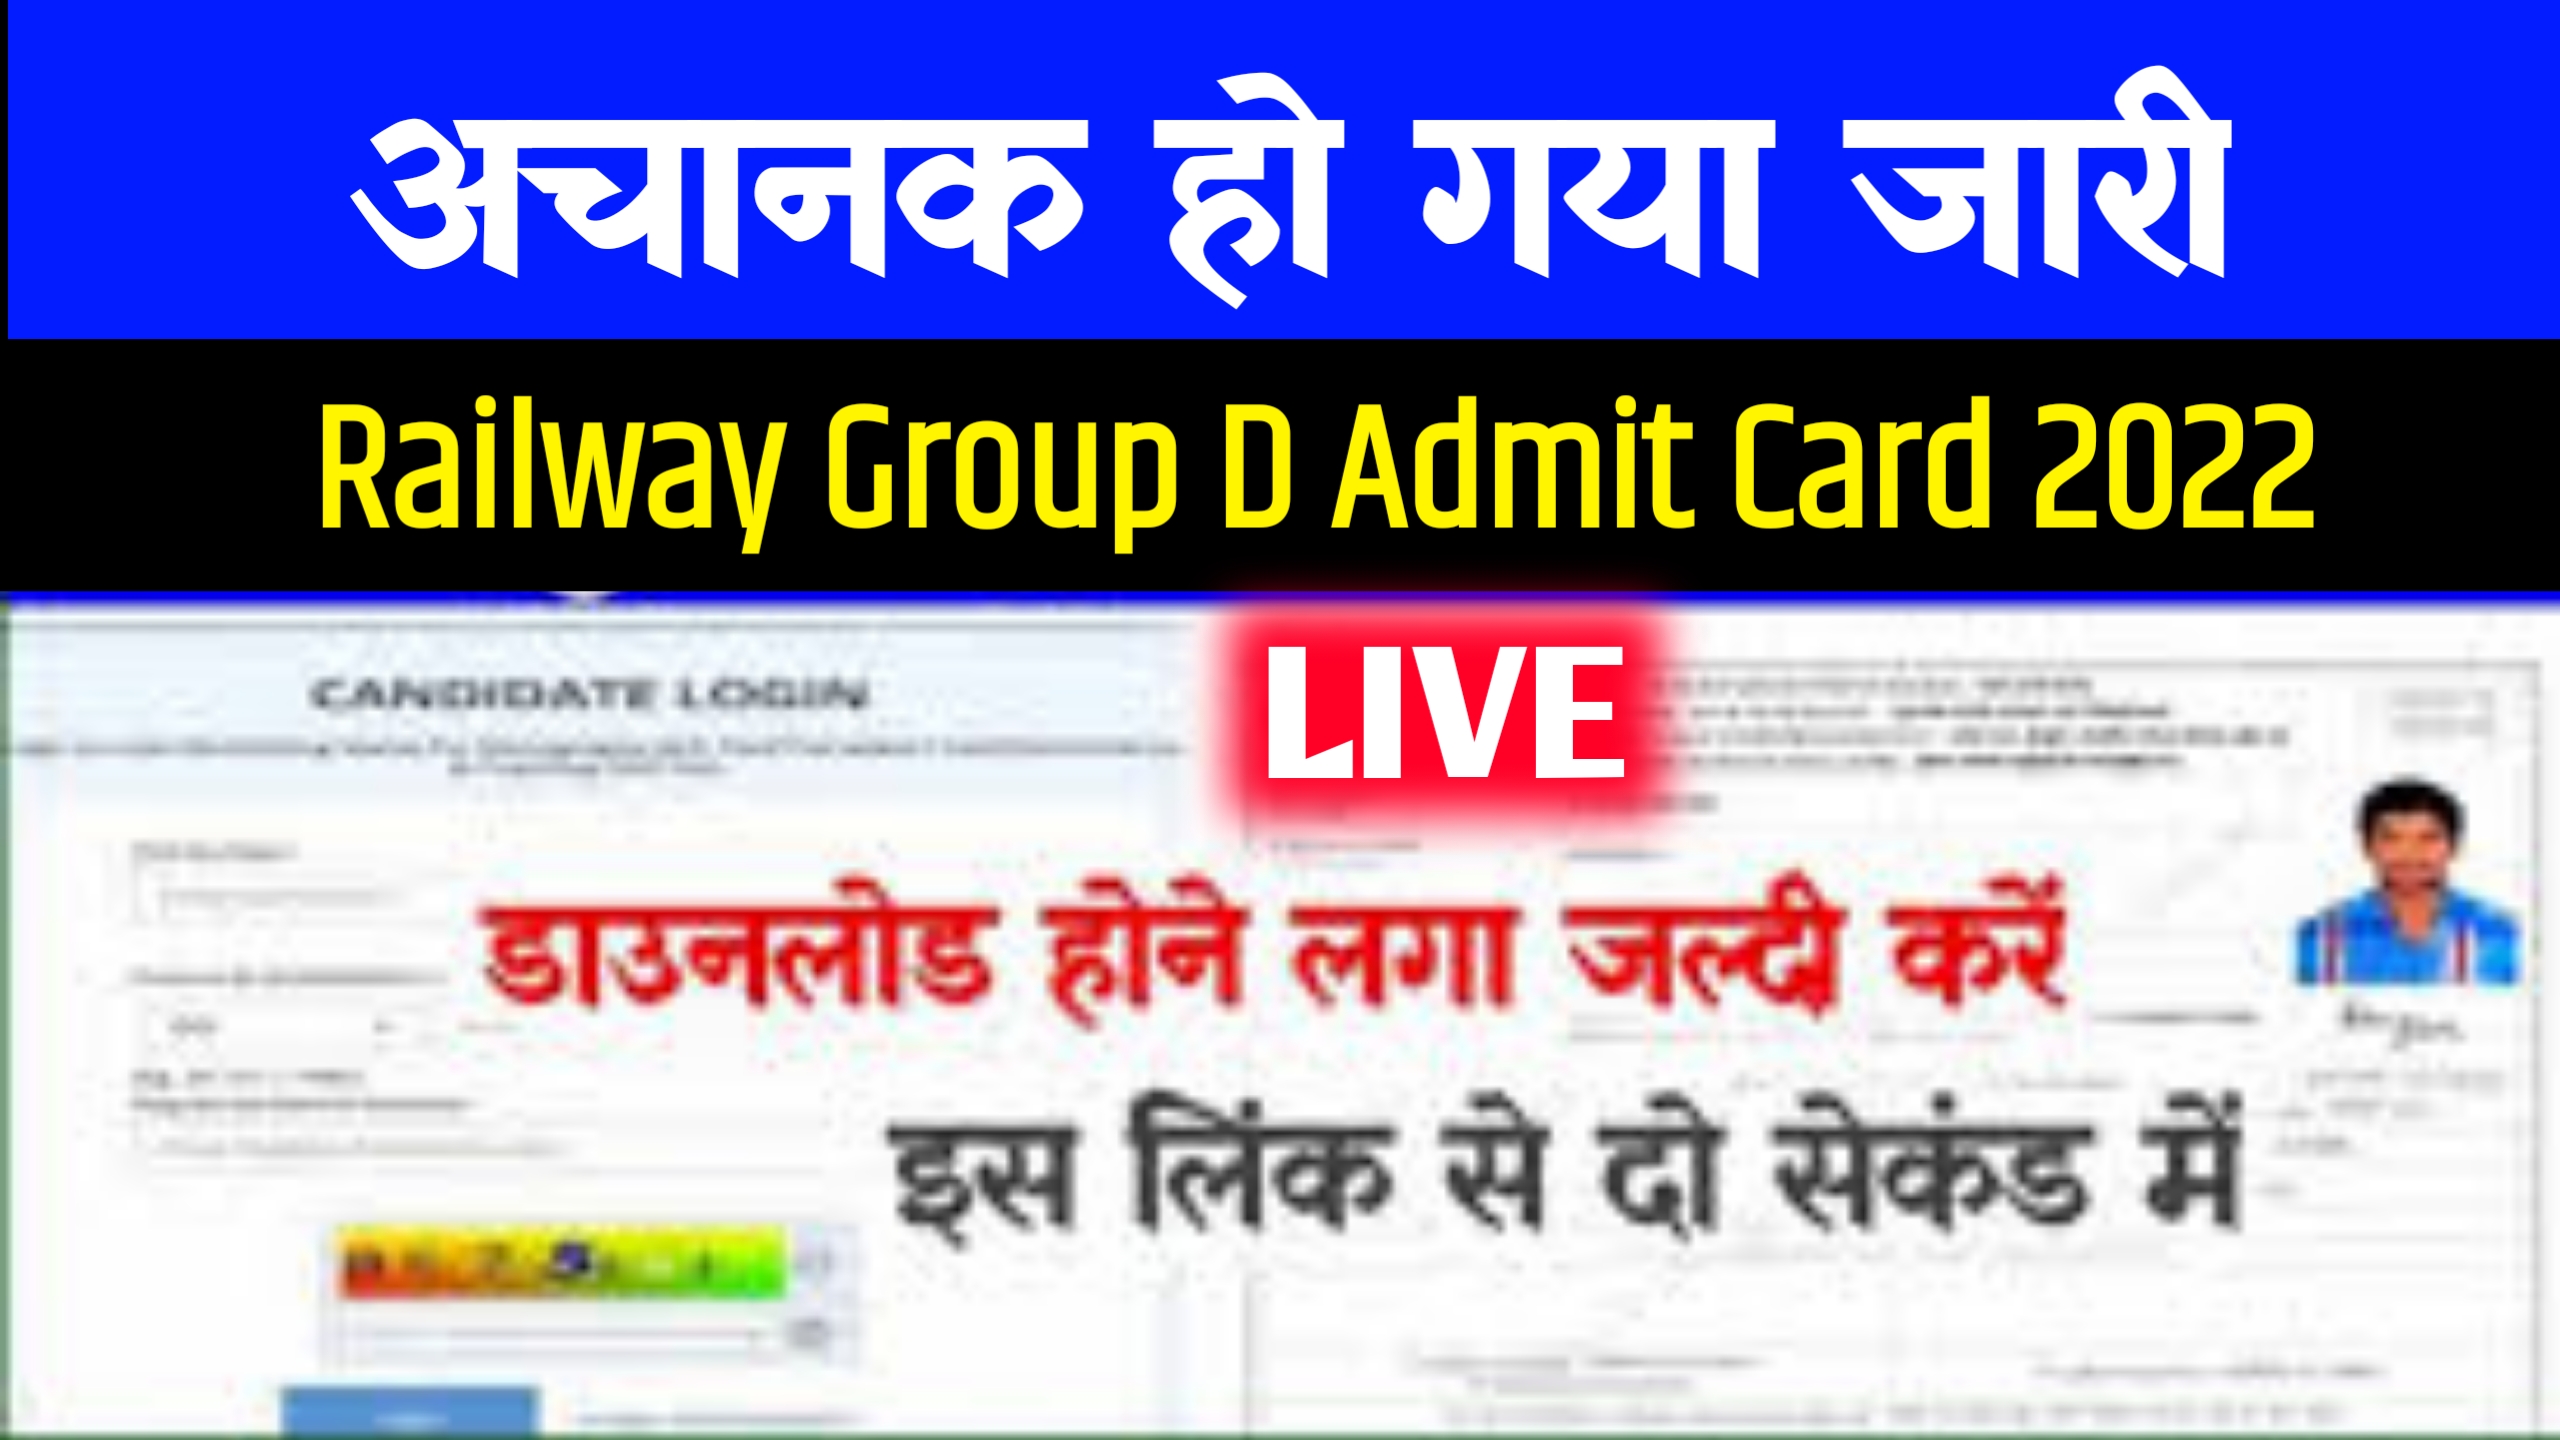 Railway Group D Admit Card 2022 Download ~ rrbcdg.gov.in Hall Ticket